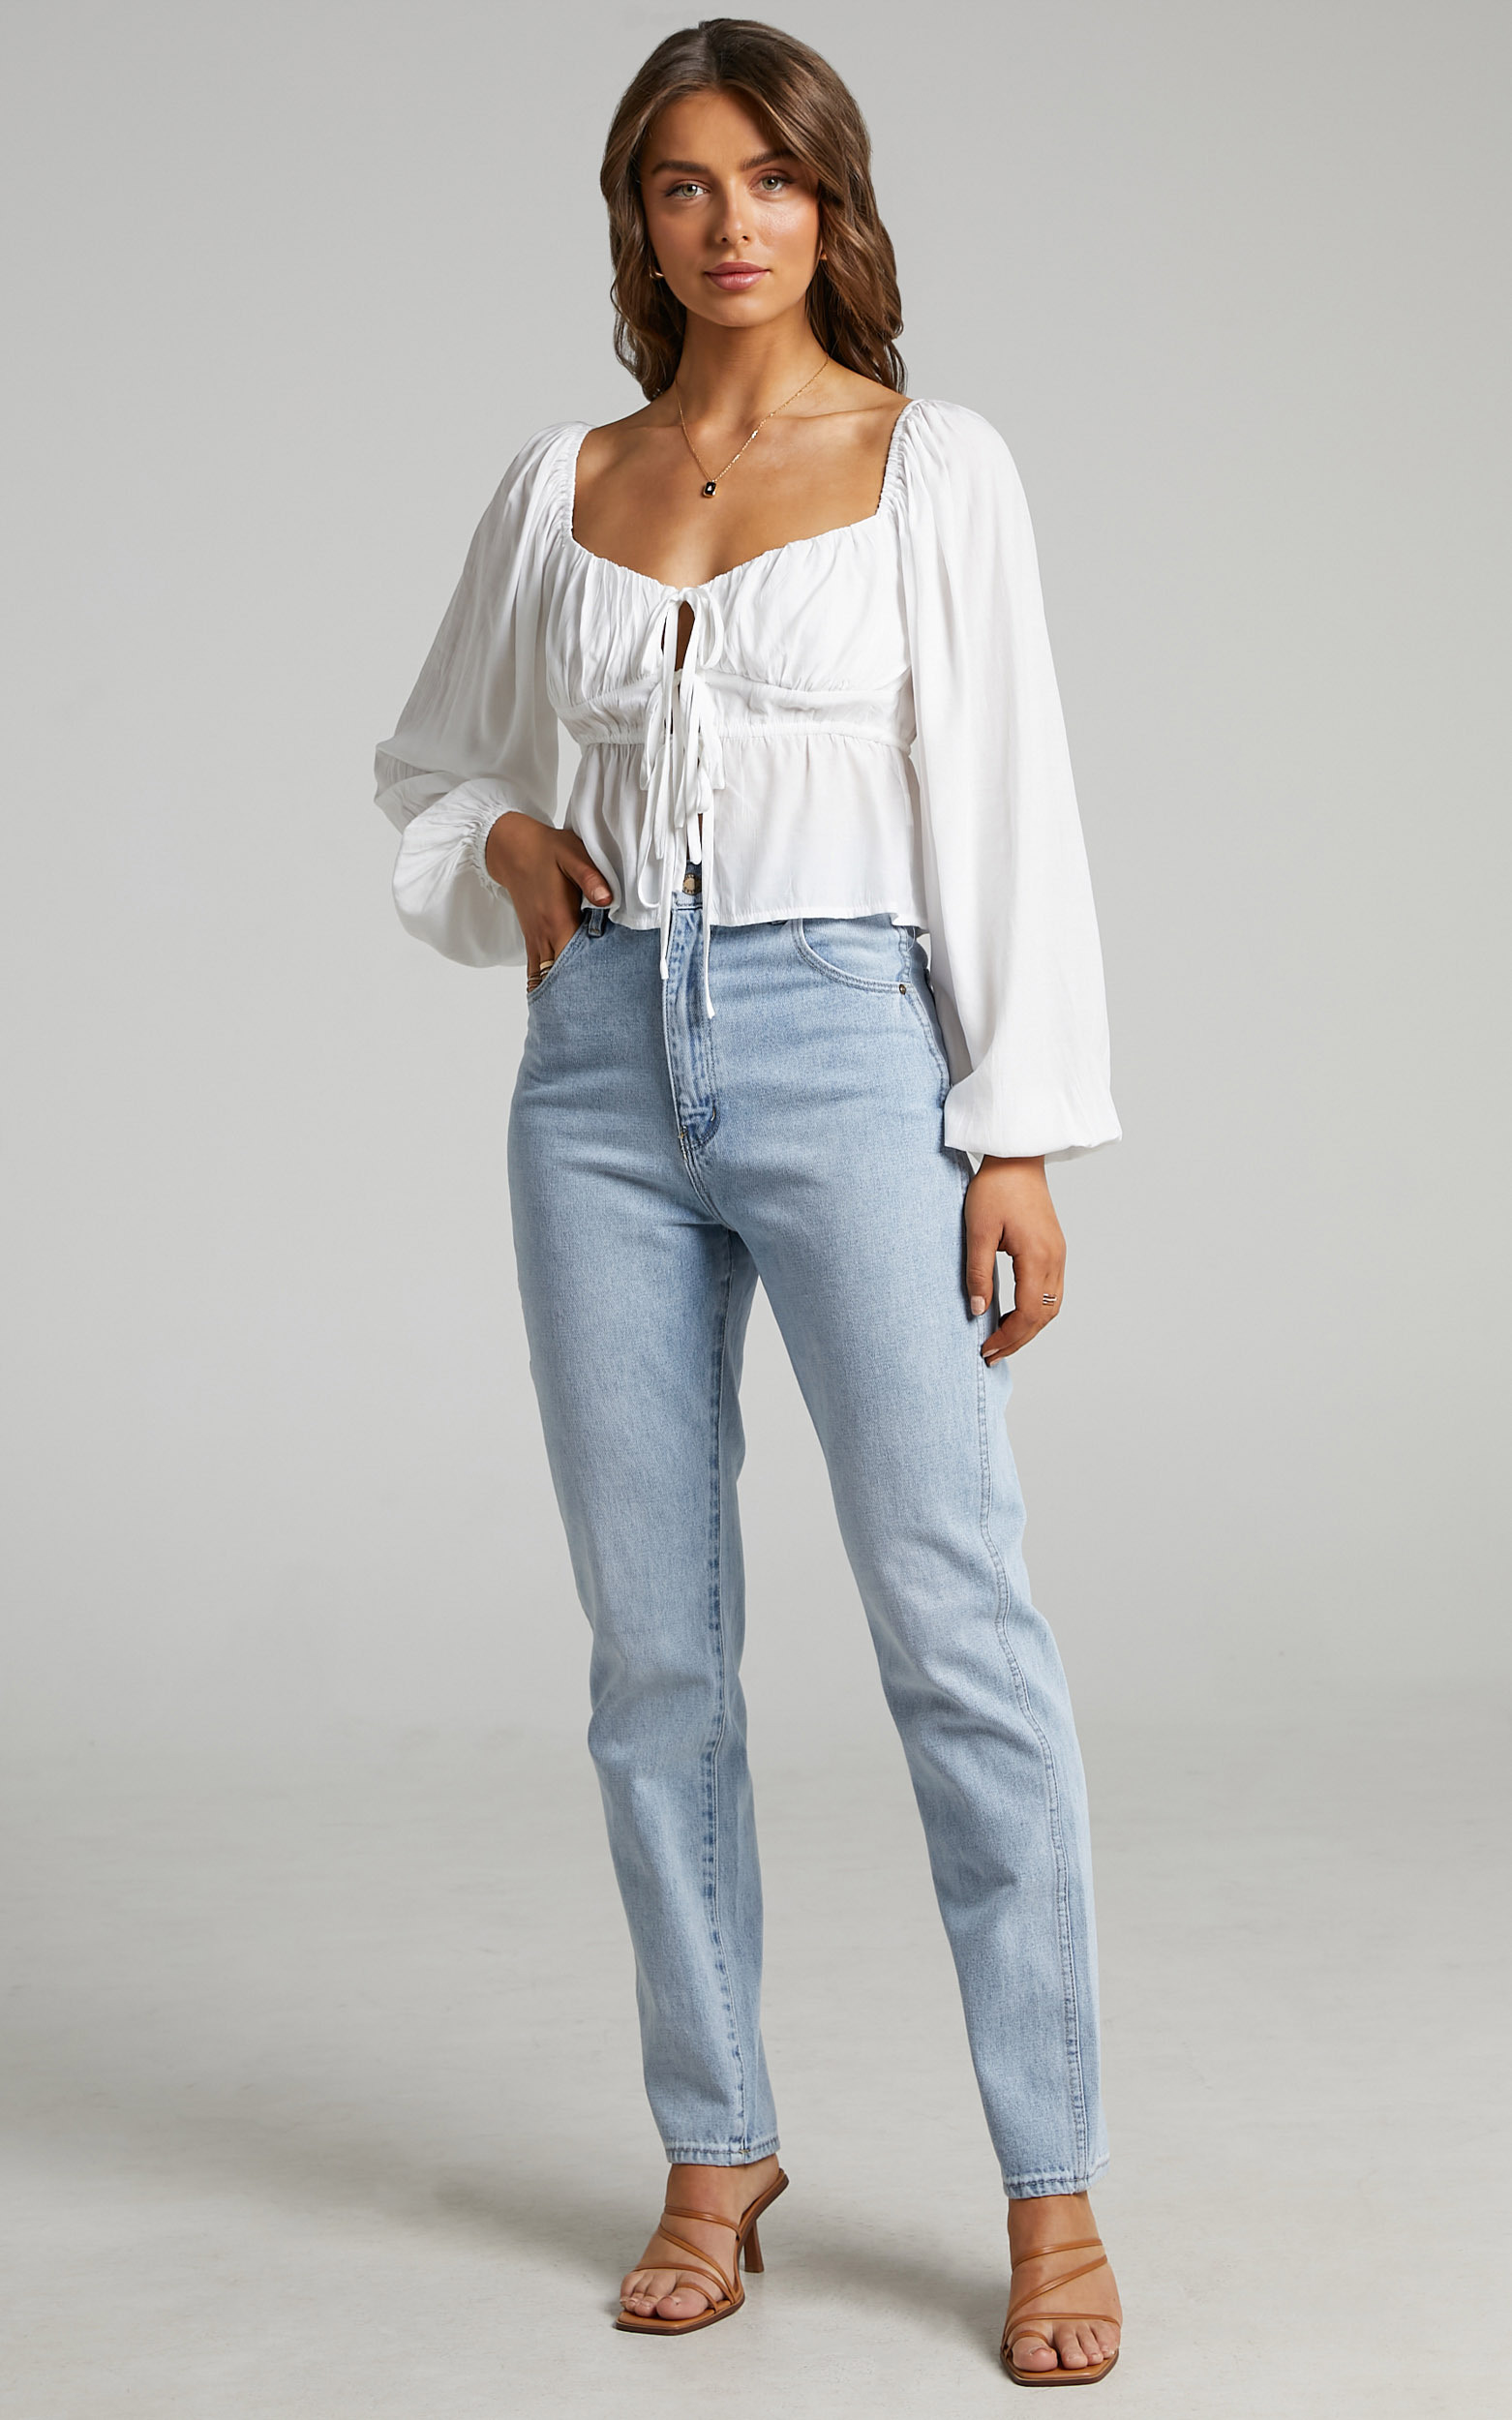 Nadine Long Sleeve Top with Ruched Bust in White - 06, WHT5, hi-res image number null